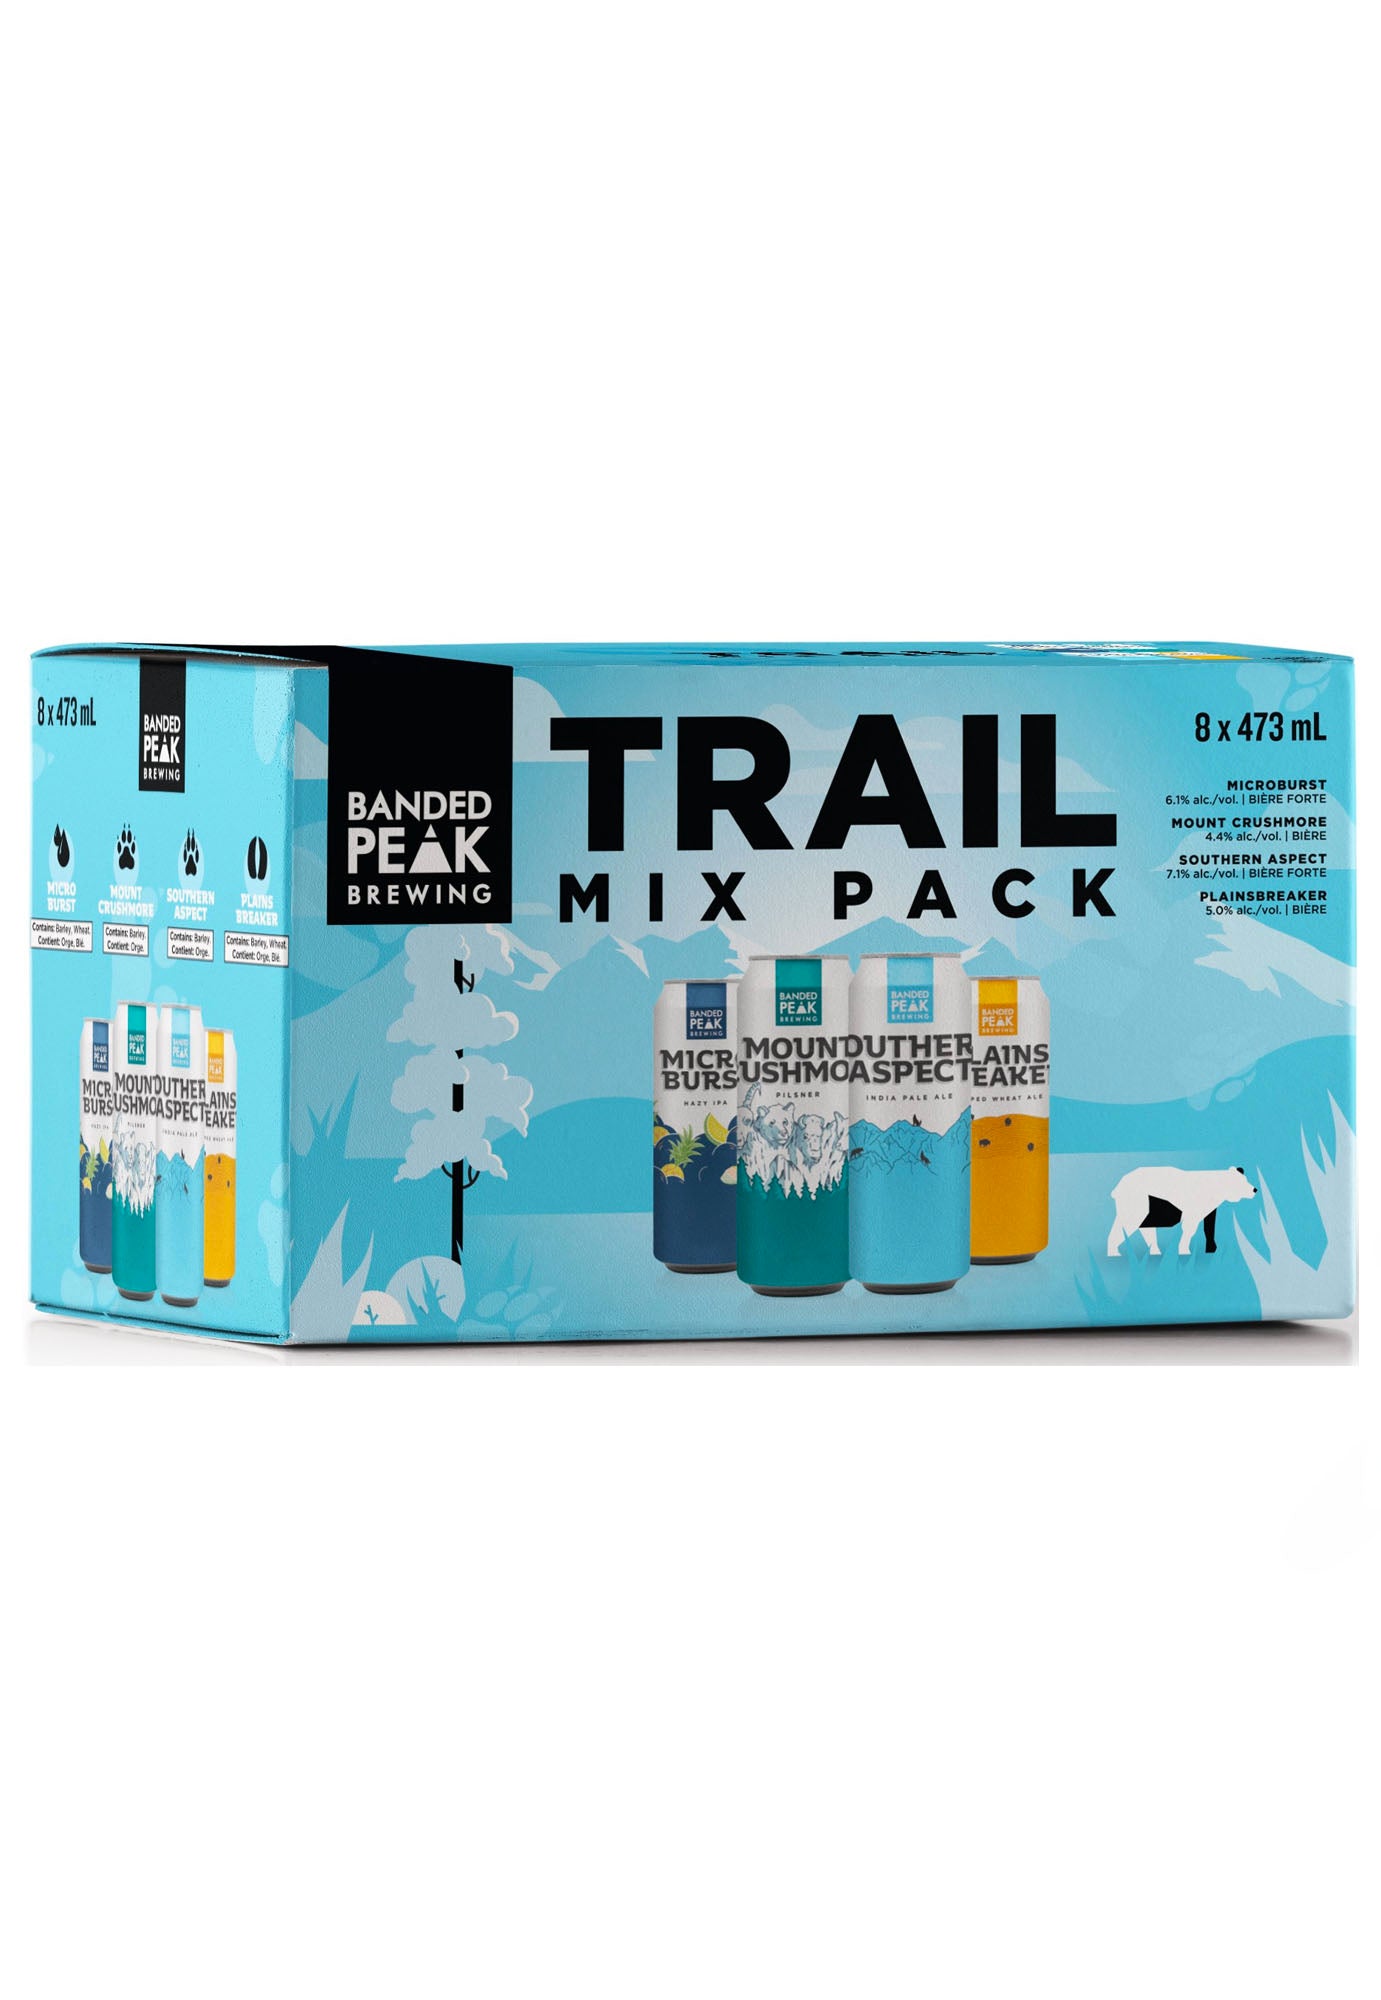 Banded Peak Trail Mix Pack 473 ml - 8 Cans